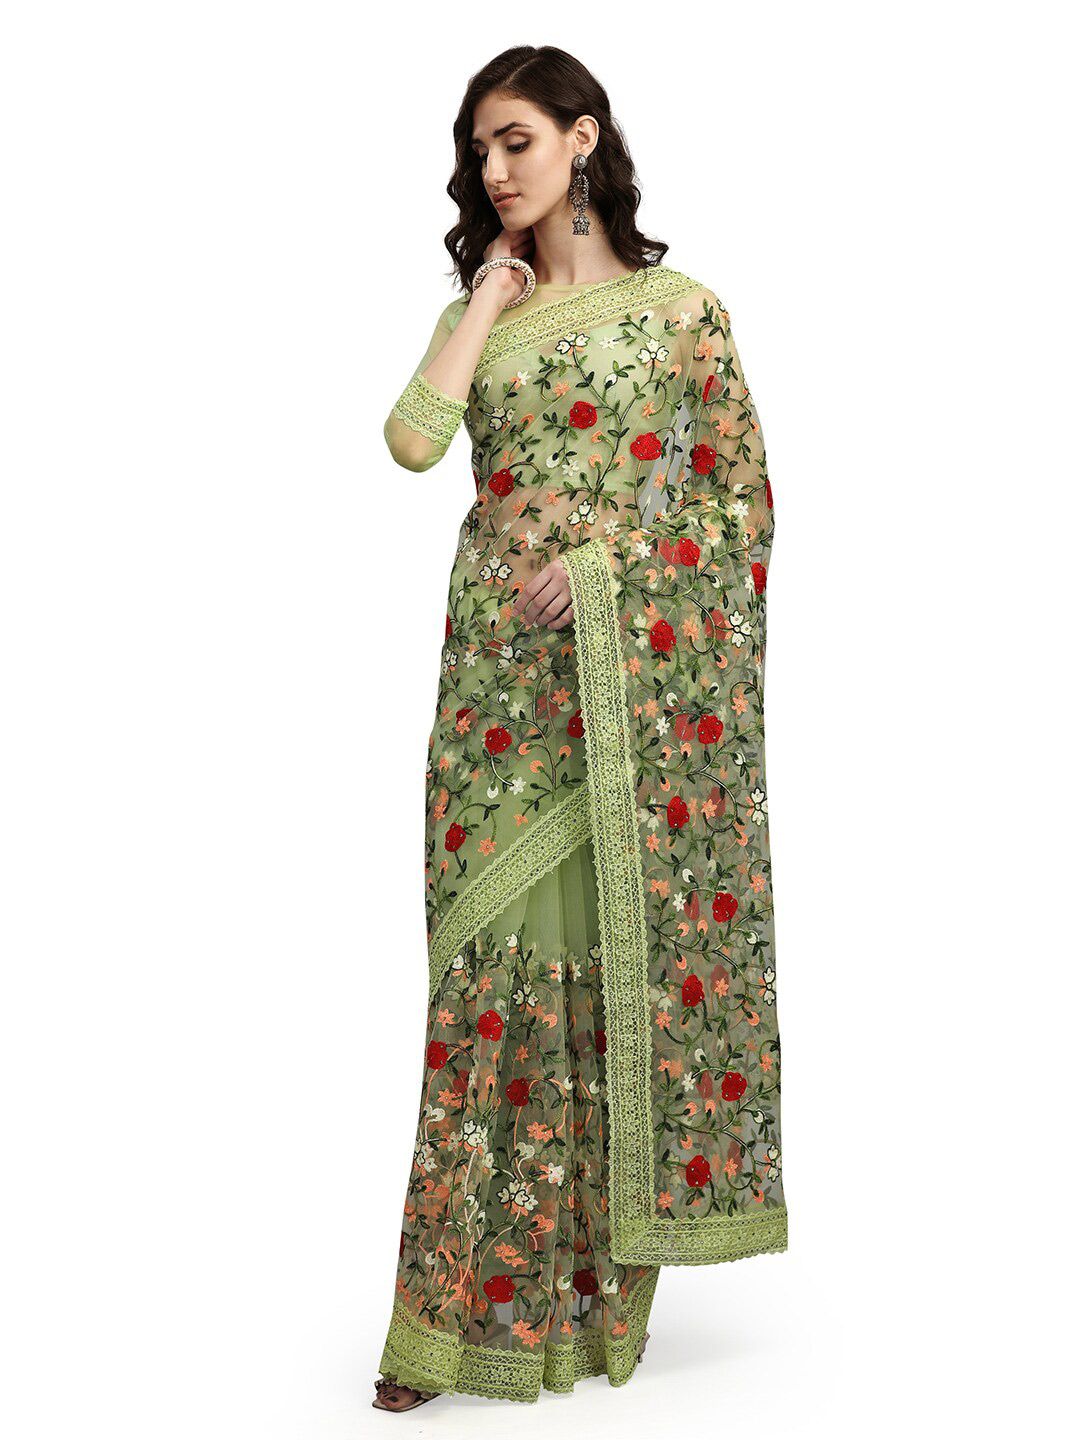 Pisara Olive Green & Red Floral Embroidered Net Saree Price in India